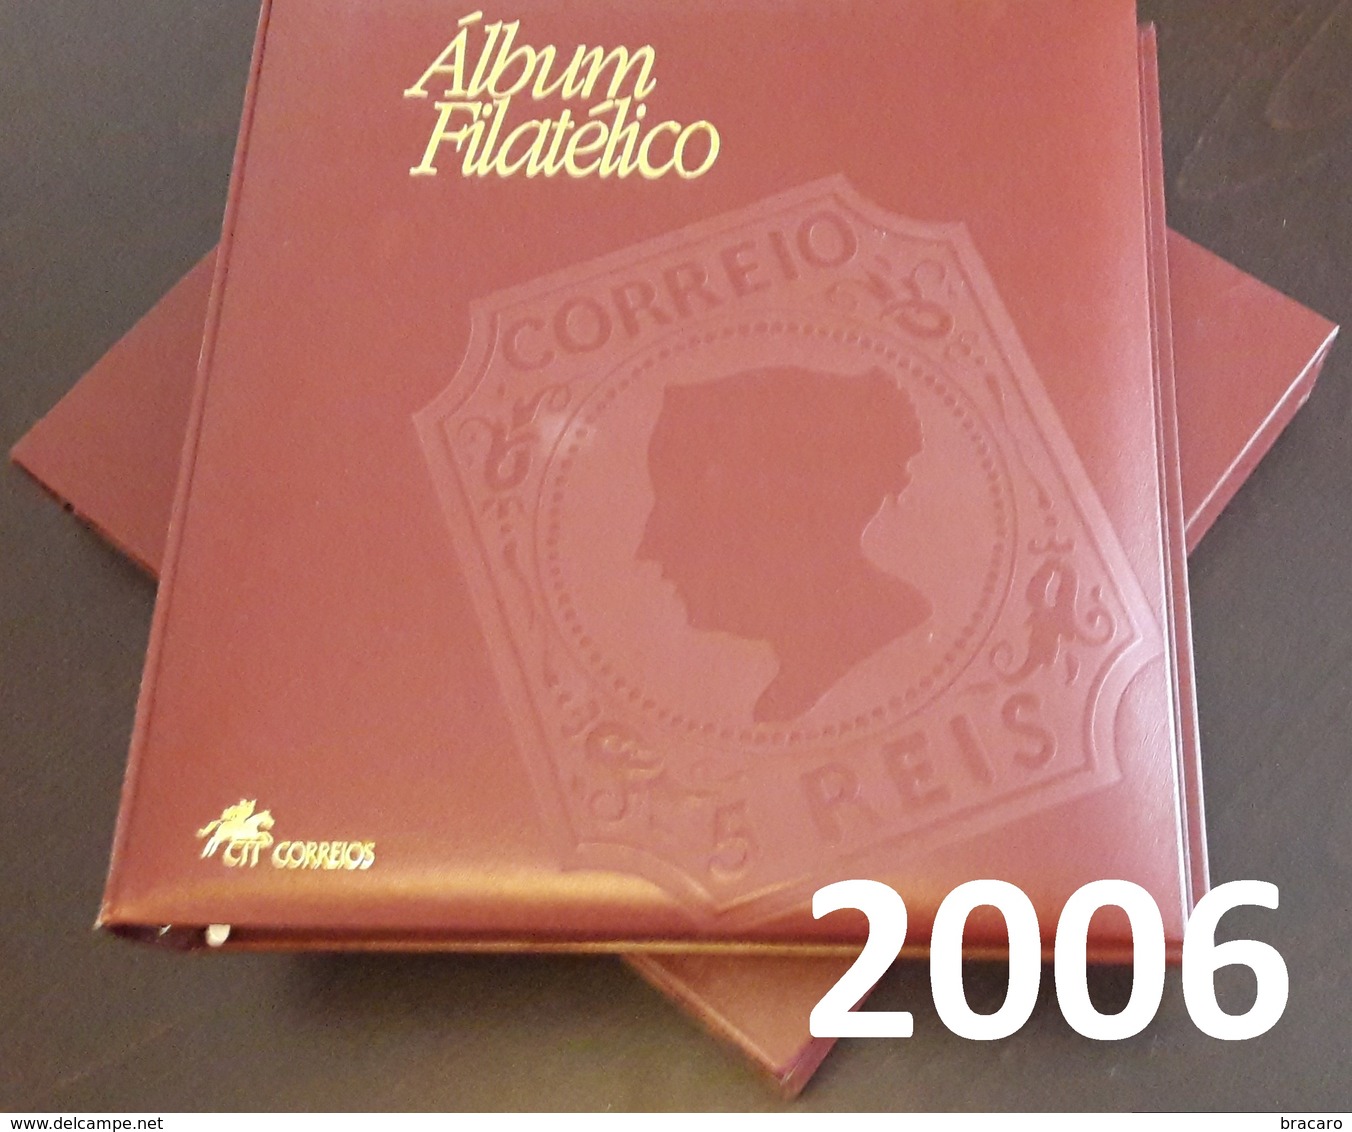 PORTUGAL - ÁLBUM FILATÉLICO - Full Year Stamps + Blocks + ATM / Machine Stamps - MNH - 2006 - Book Of The Year